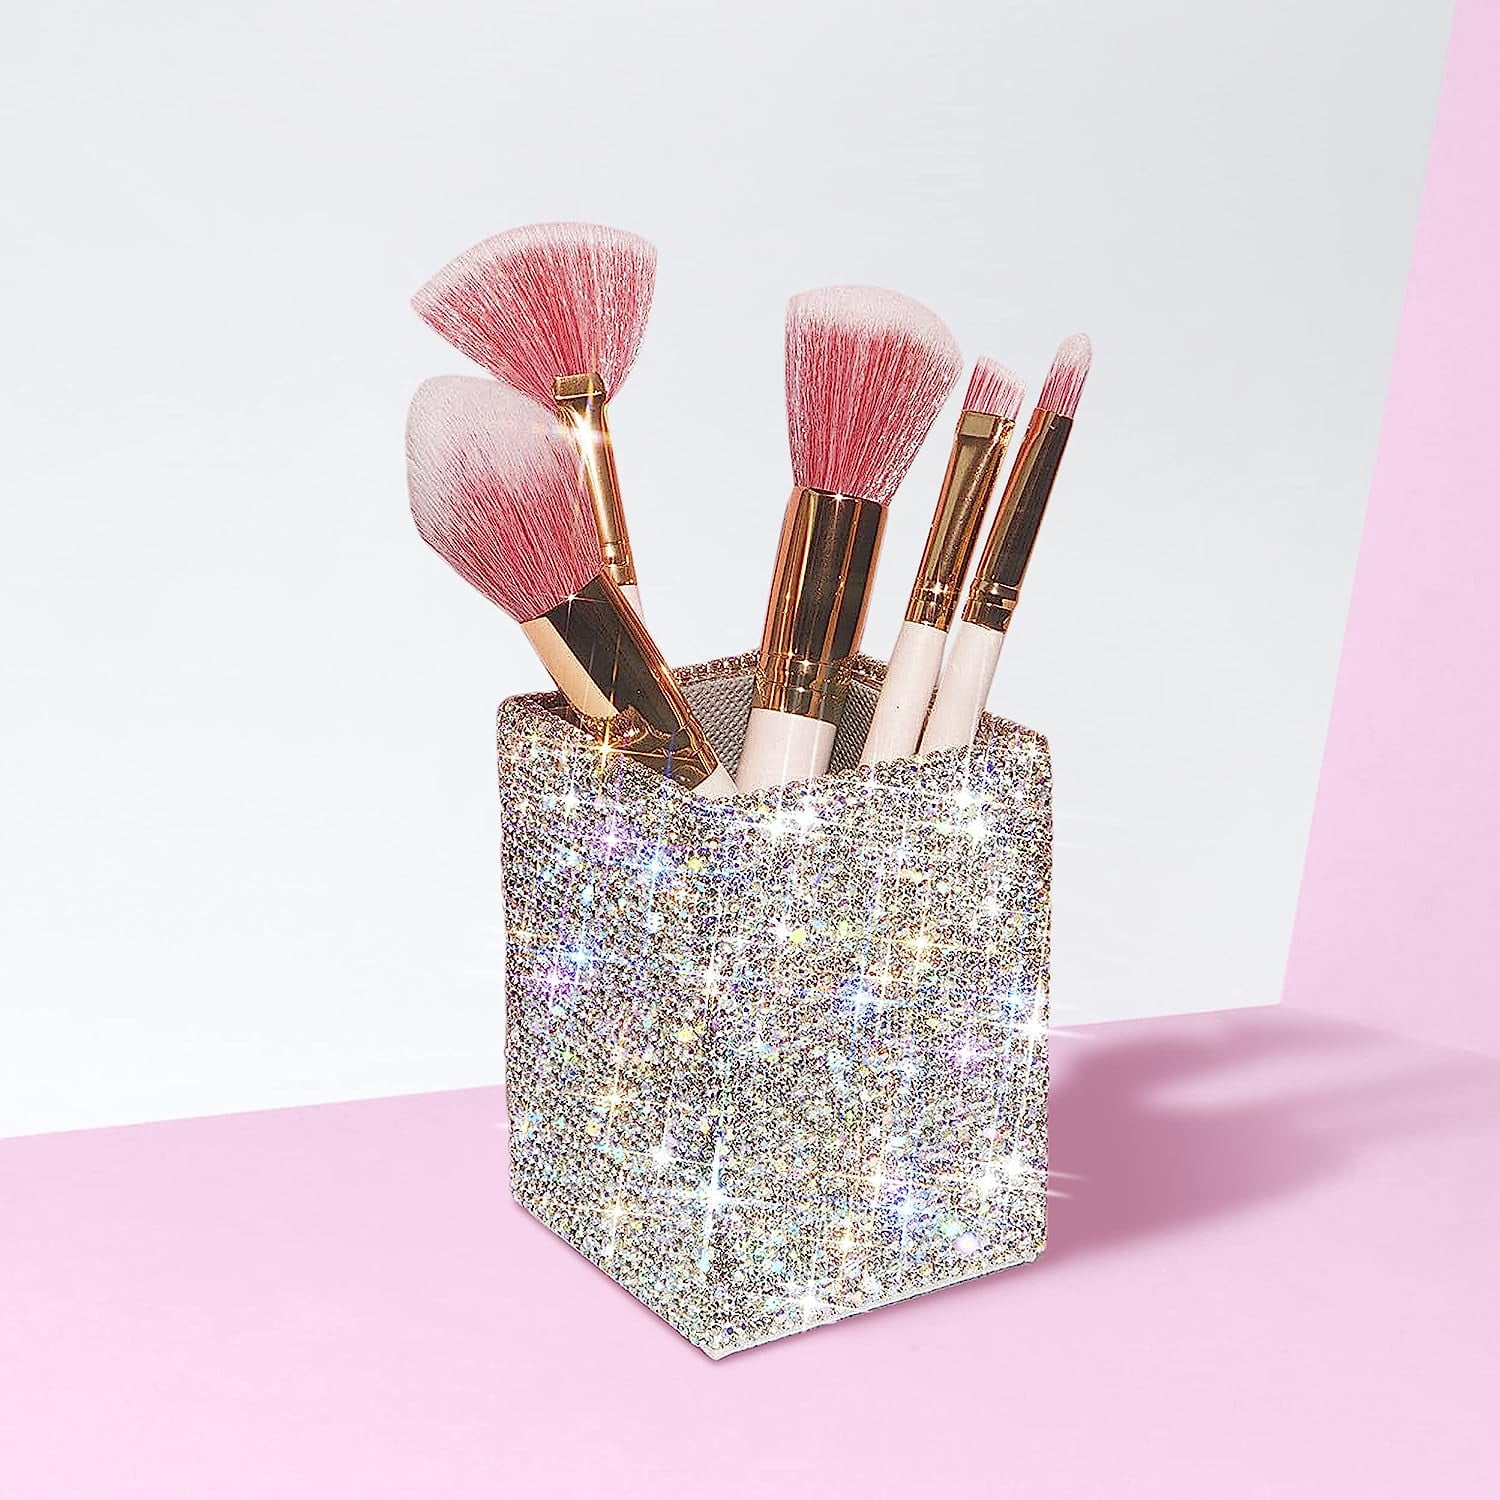 Sohindel Glitter Makeup Brush Holder, Bling Waterproof Pencil Organizer Cup Desk Accessories Luxury Office Supplies - Pink, Size: Small